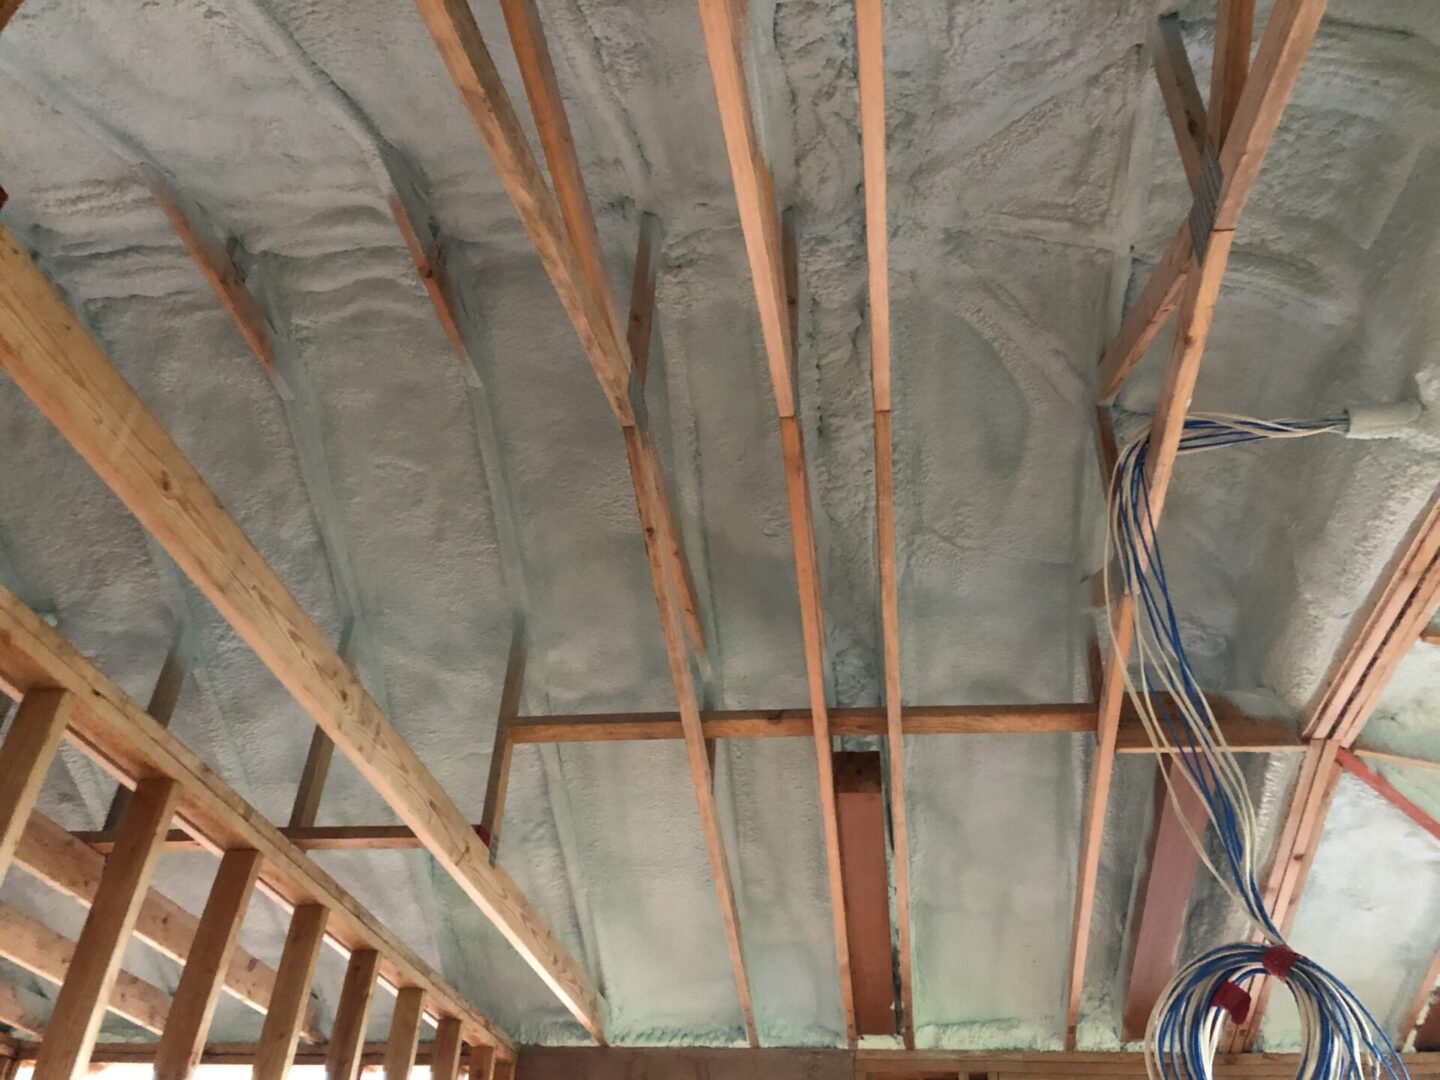 Beams and ceiling with spray on insulation